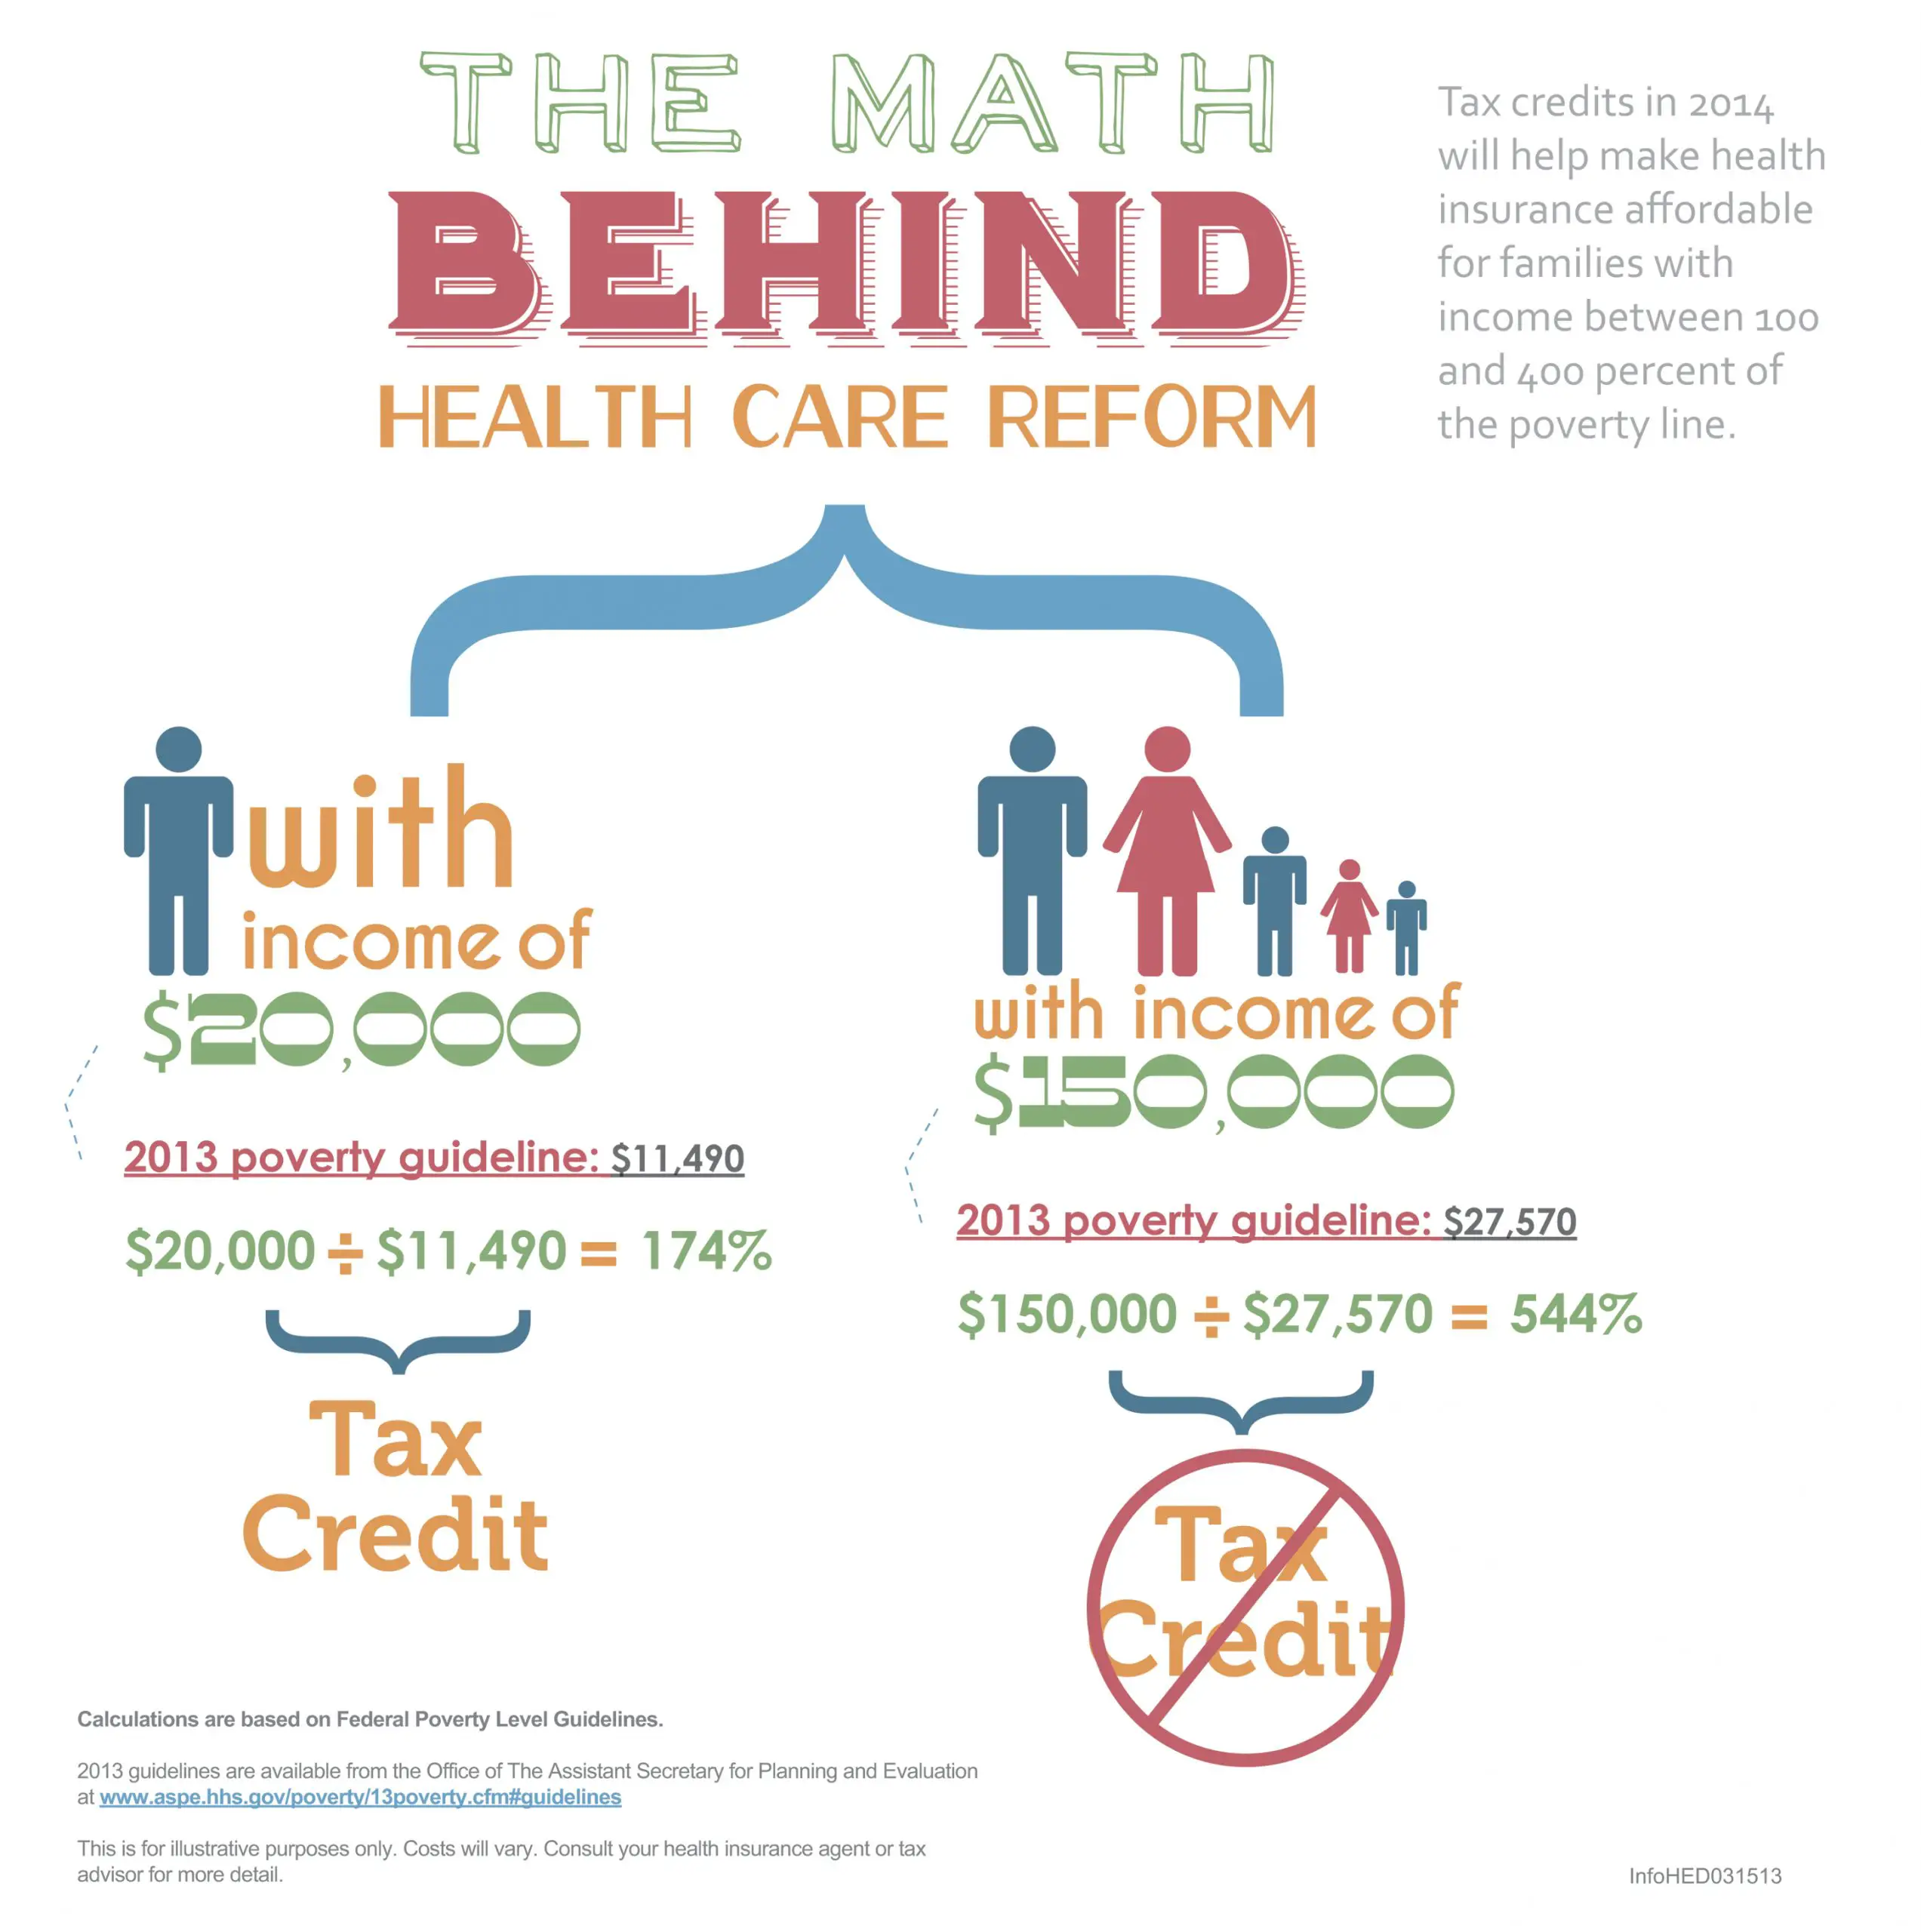 IHC Specialty Benefits Releases an Affordable Care Act Infographic to ...